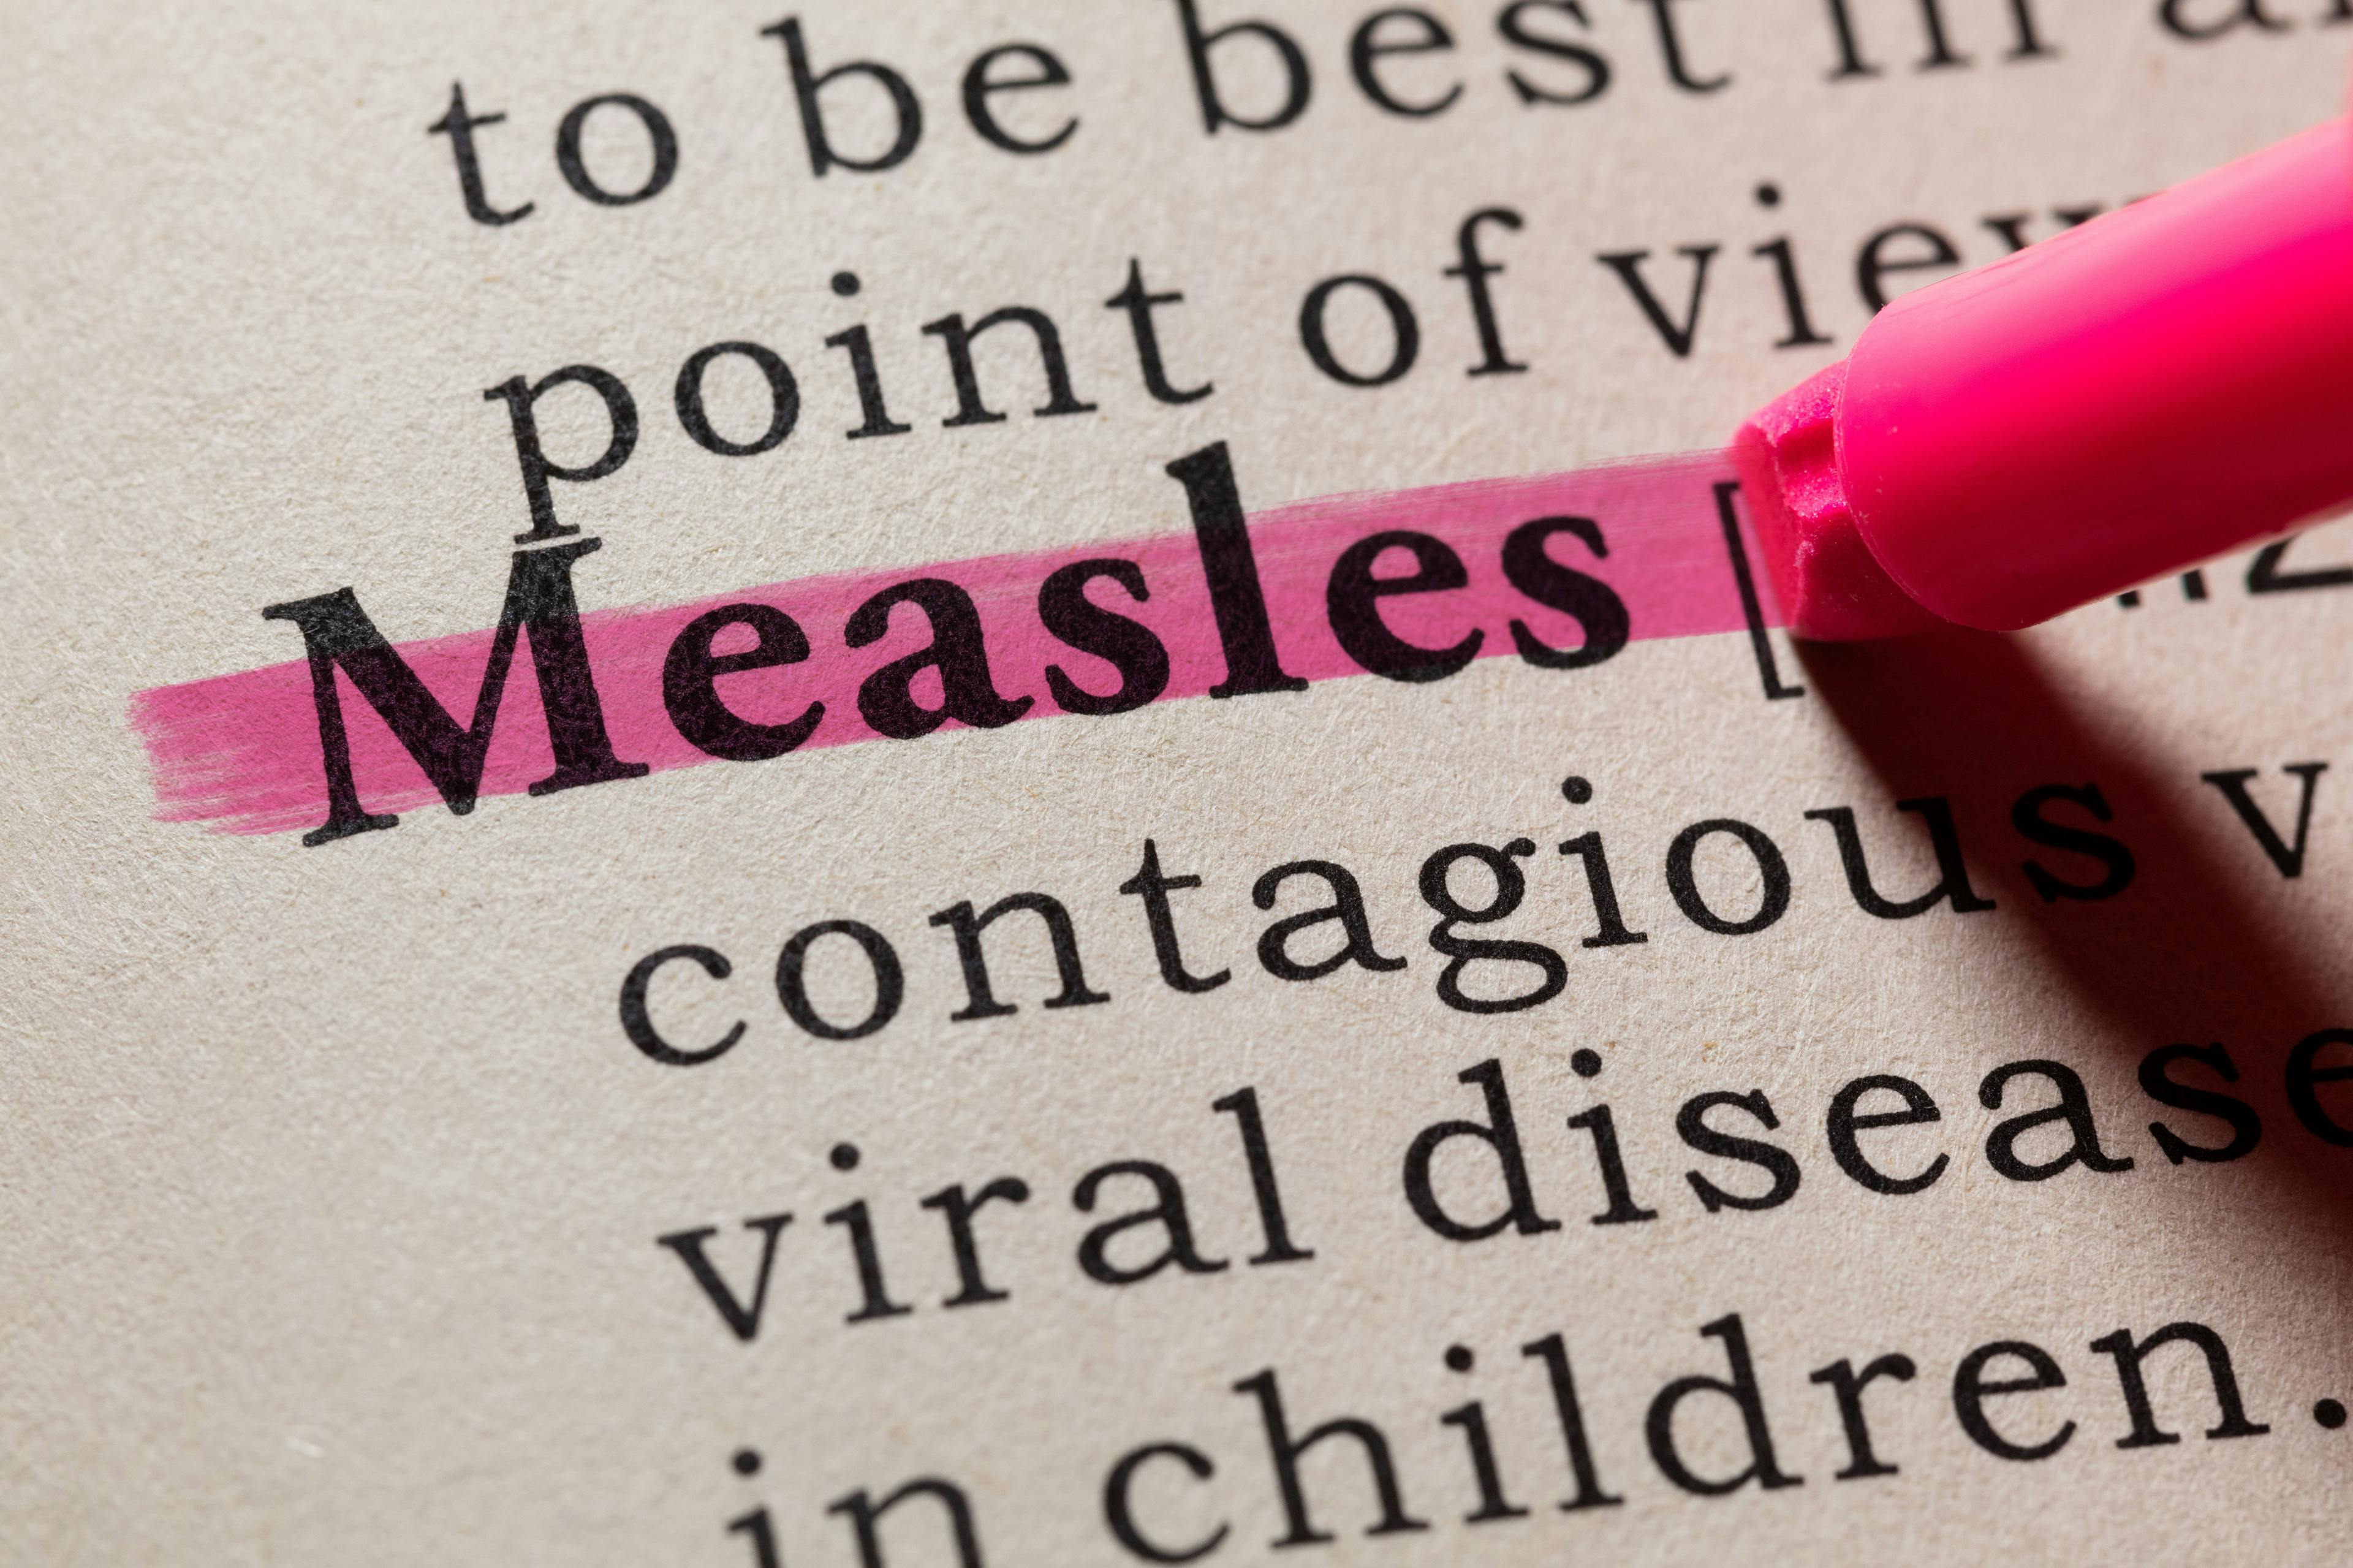   Re-imagining Measles Eradication: Self-Vaccination With an Inhaled Powder. Plus Using Social Networks and Financial Incentives